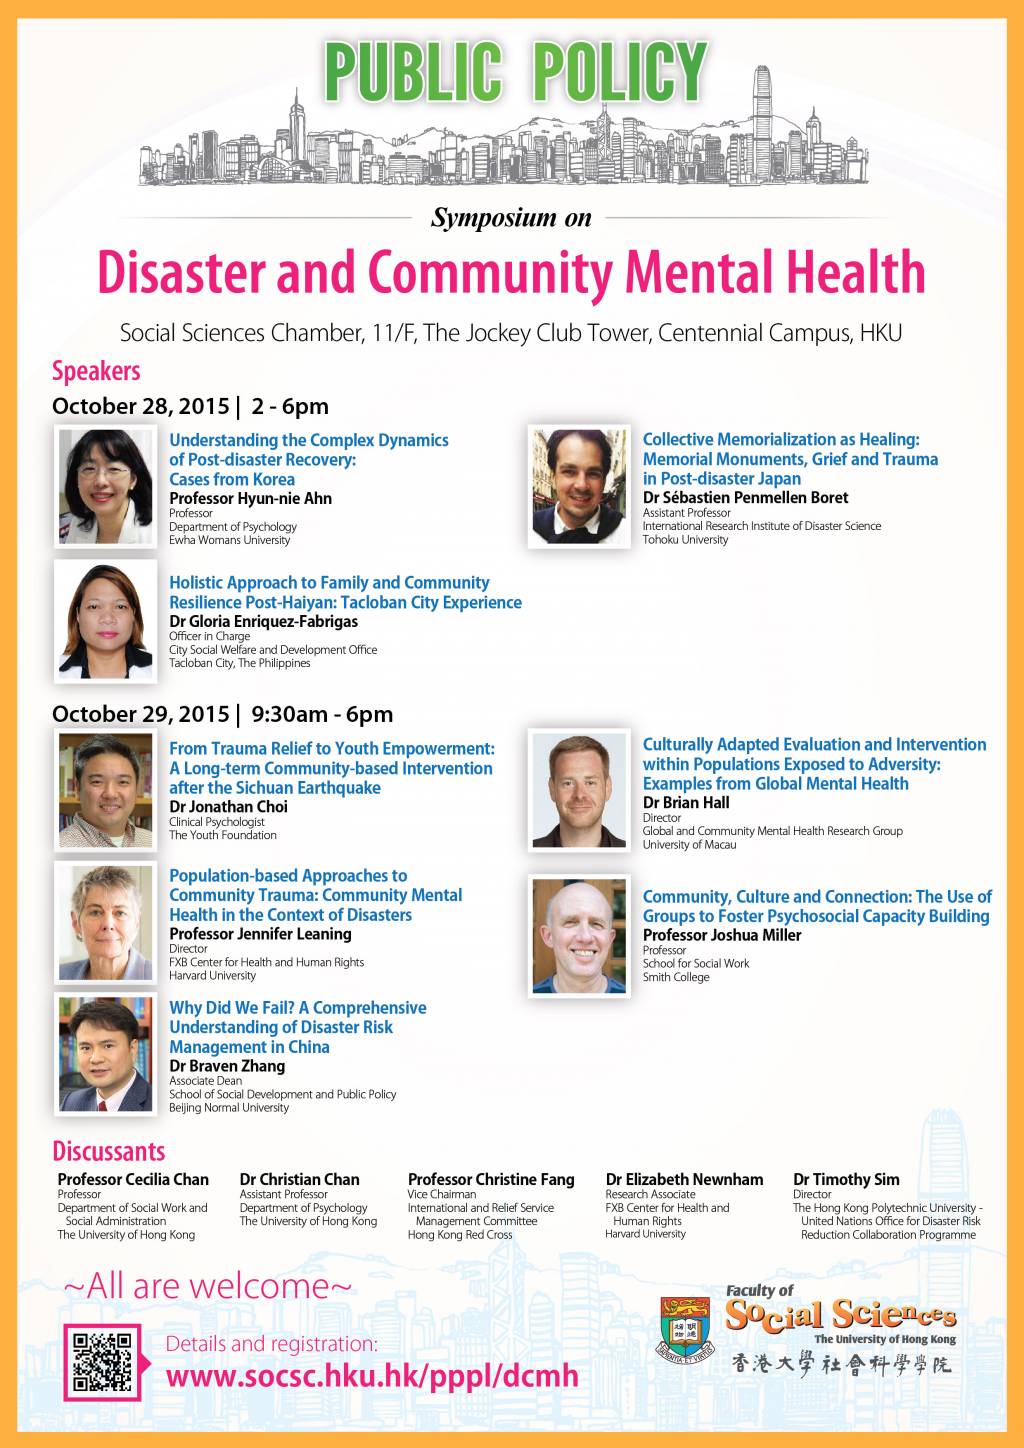 Symposium on Disaster and Community Mental Health